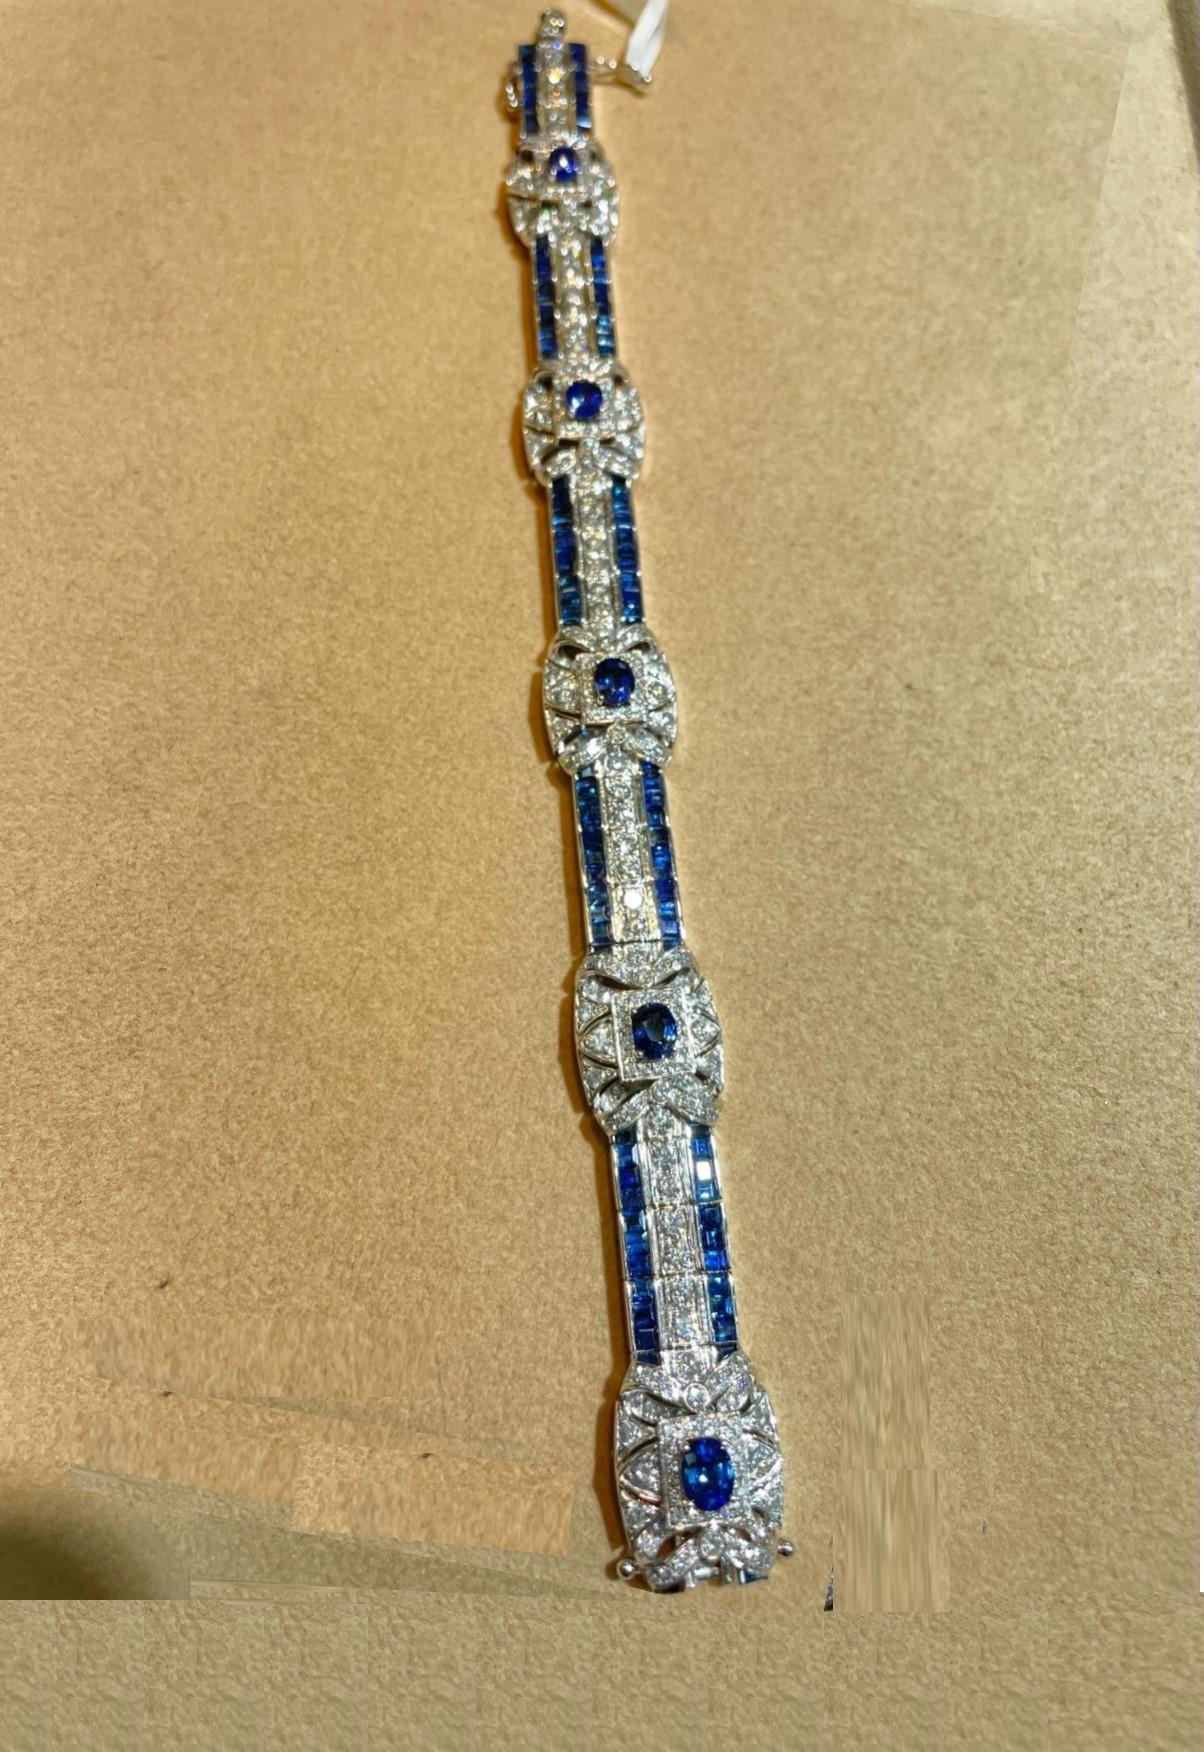 The Following Item we are Offering is this Magnificent 18KT Gold Large Extremely Rare Fancy Large Oval Cut and Princess Cut Sapphire and Diamond Bracelet. This Gorgeous Bracelet features Large Gorgeous Fancy Oval and Princess Cut Sapphires adorned